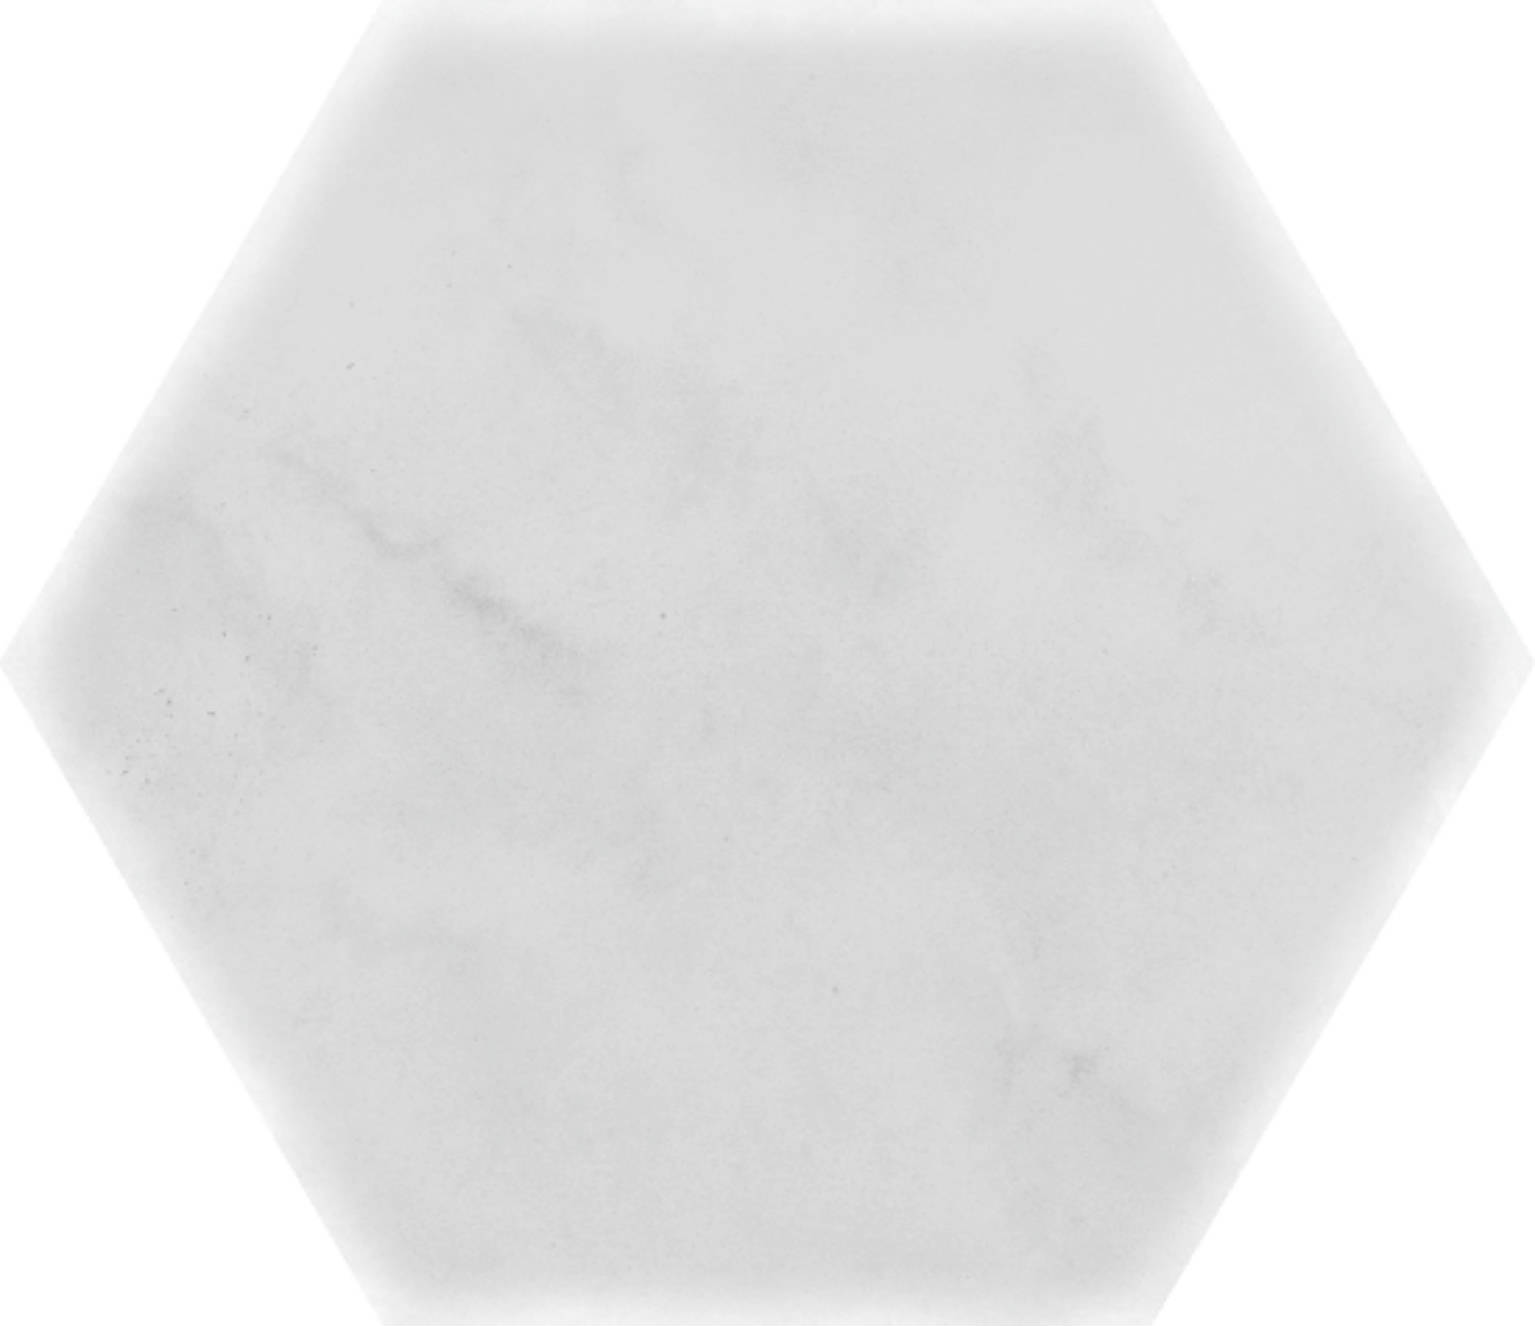 Scandinavian White | Stones And More | Finest selection of Mosaics, Glass, Tile and Stone